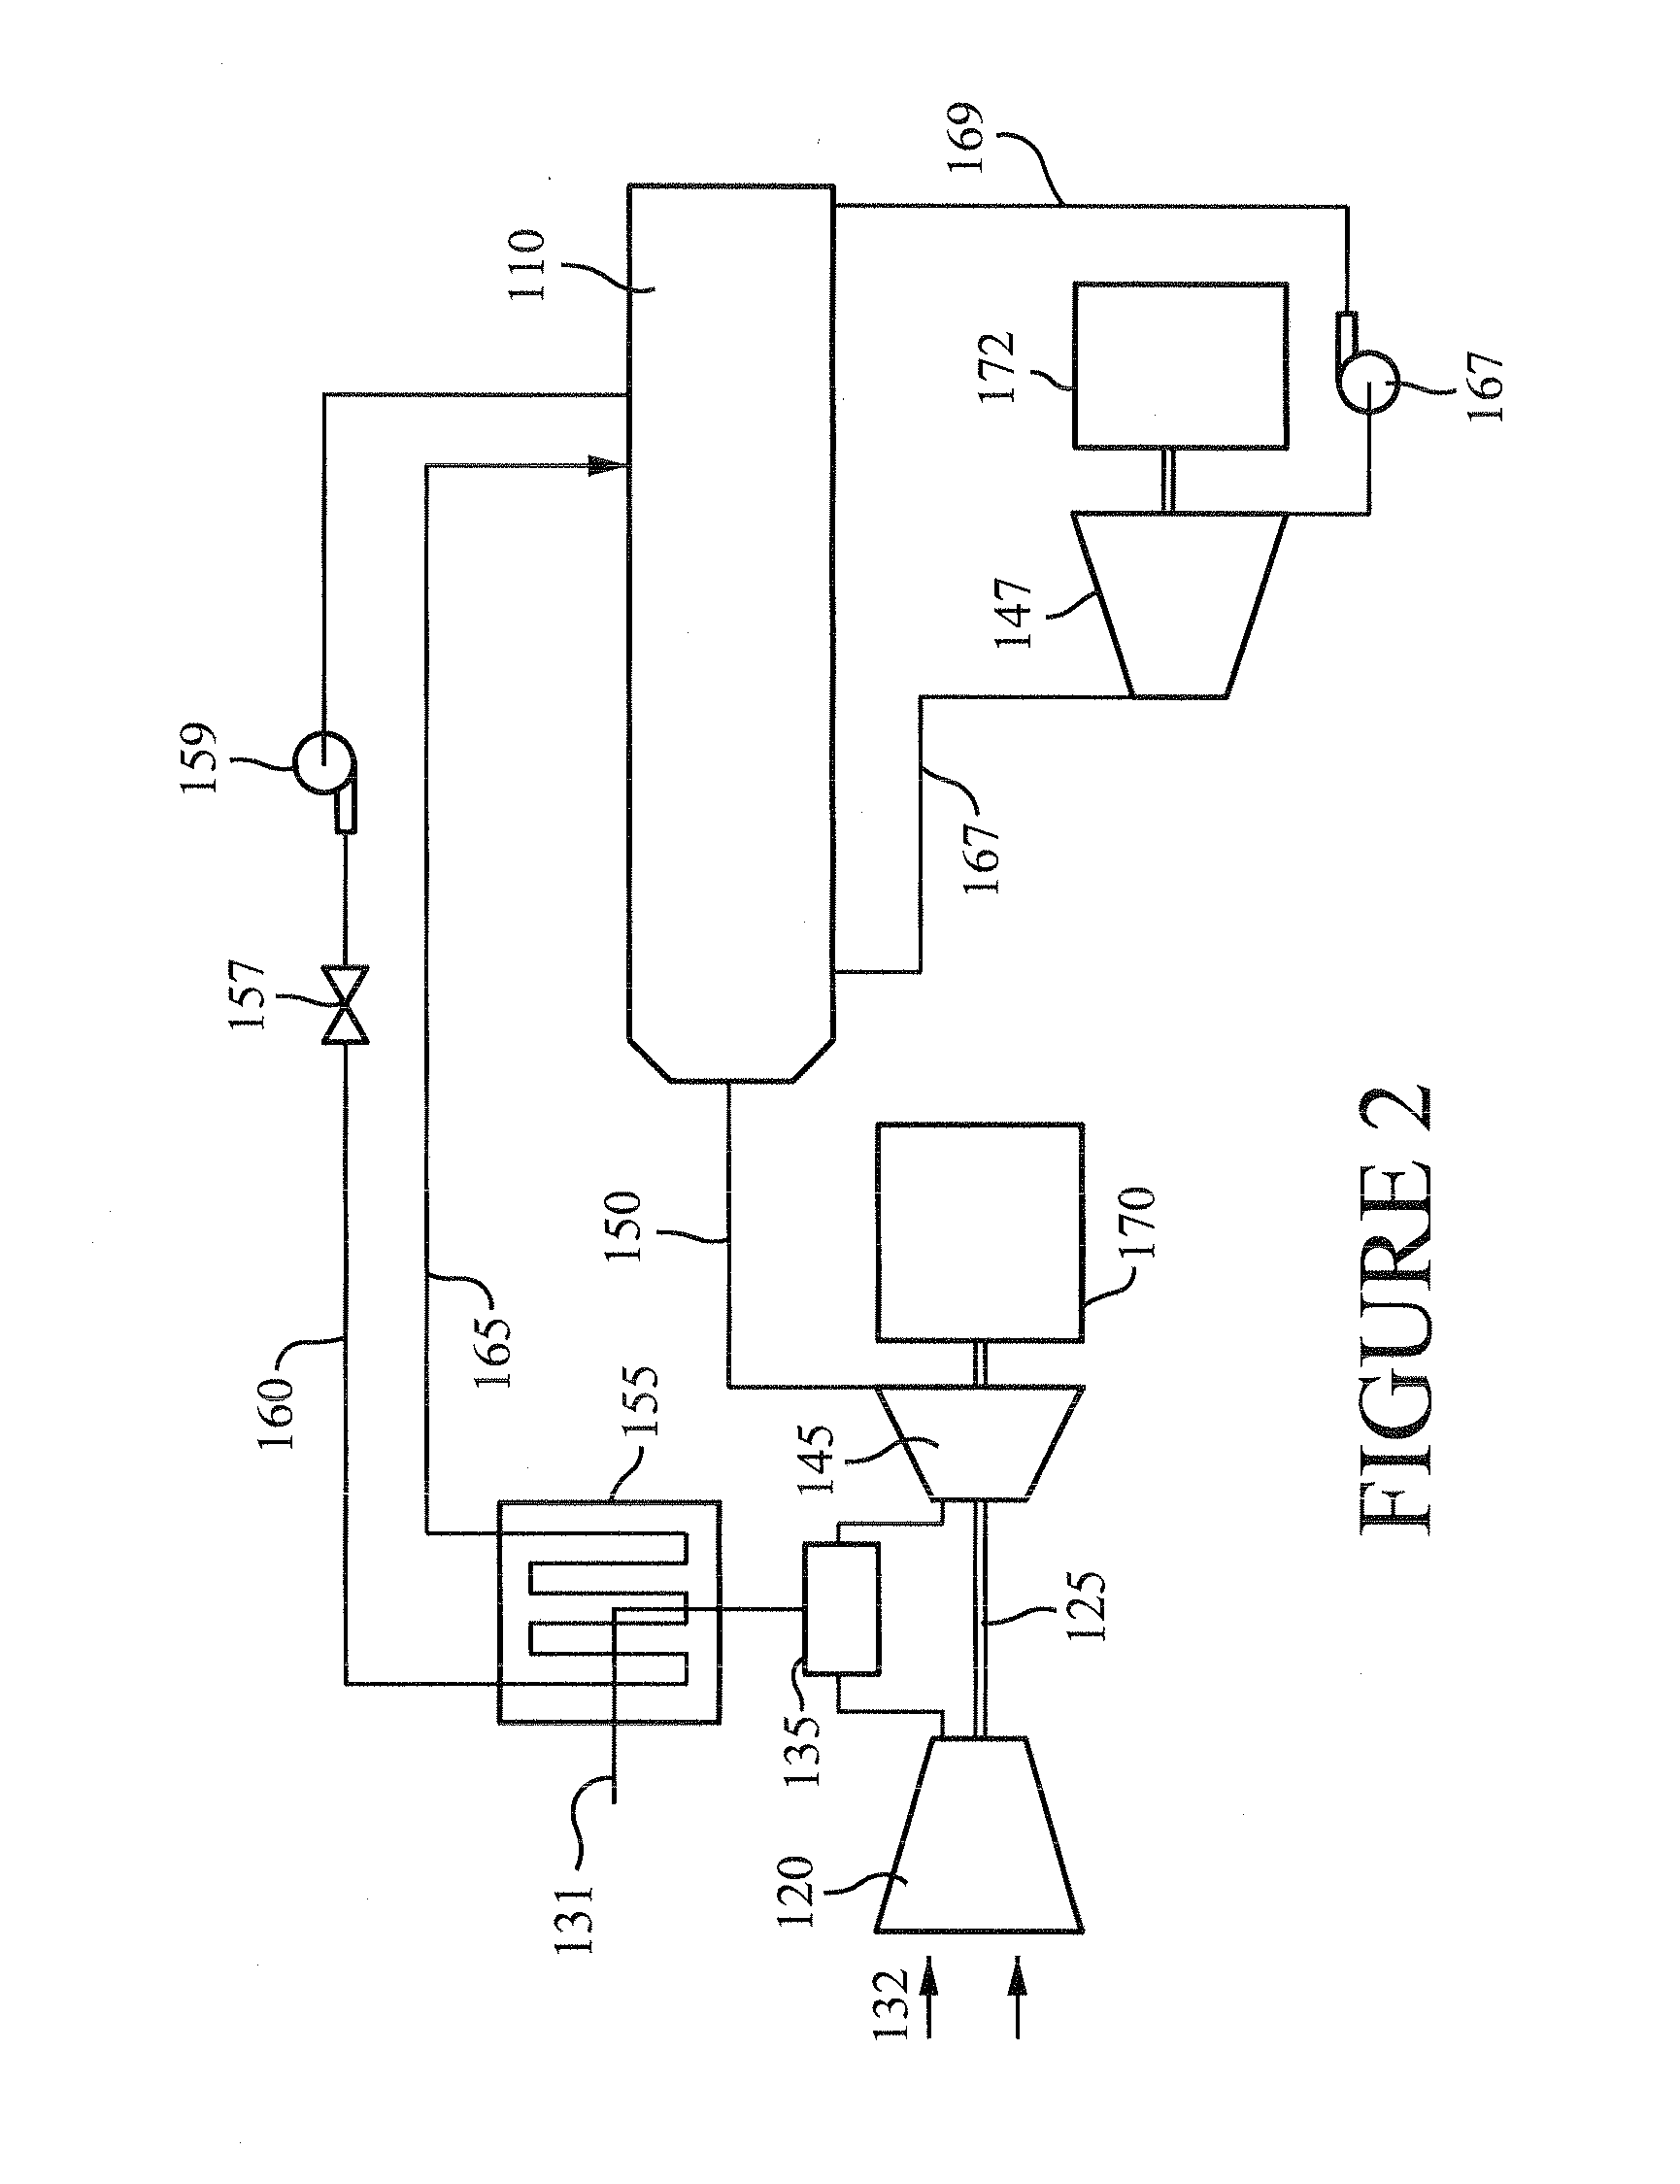 Systems and methods for improving the efficiency of a combined cycle power plant